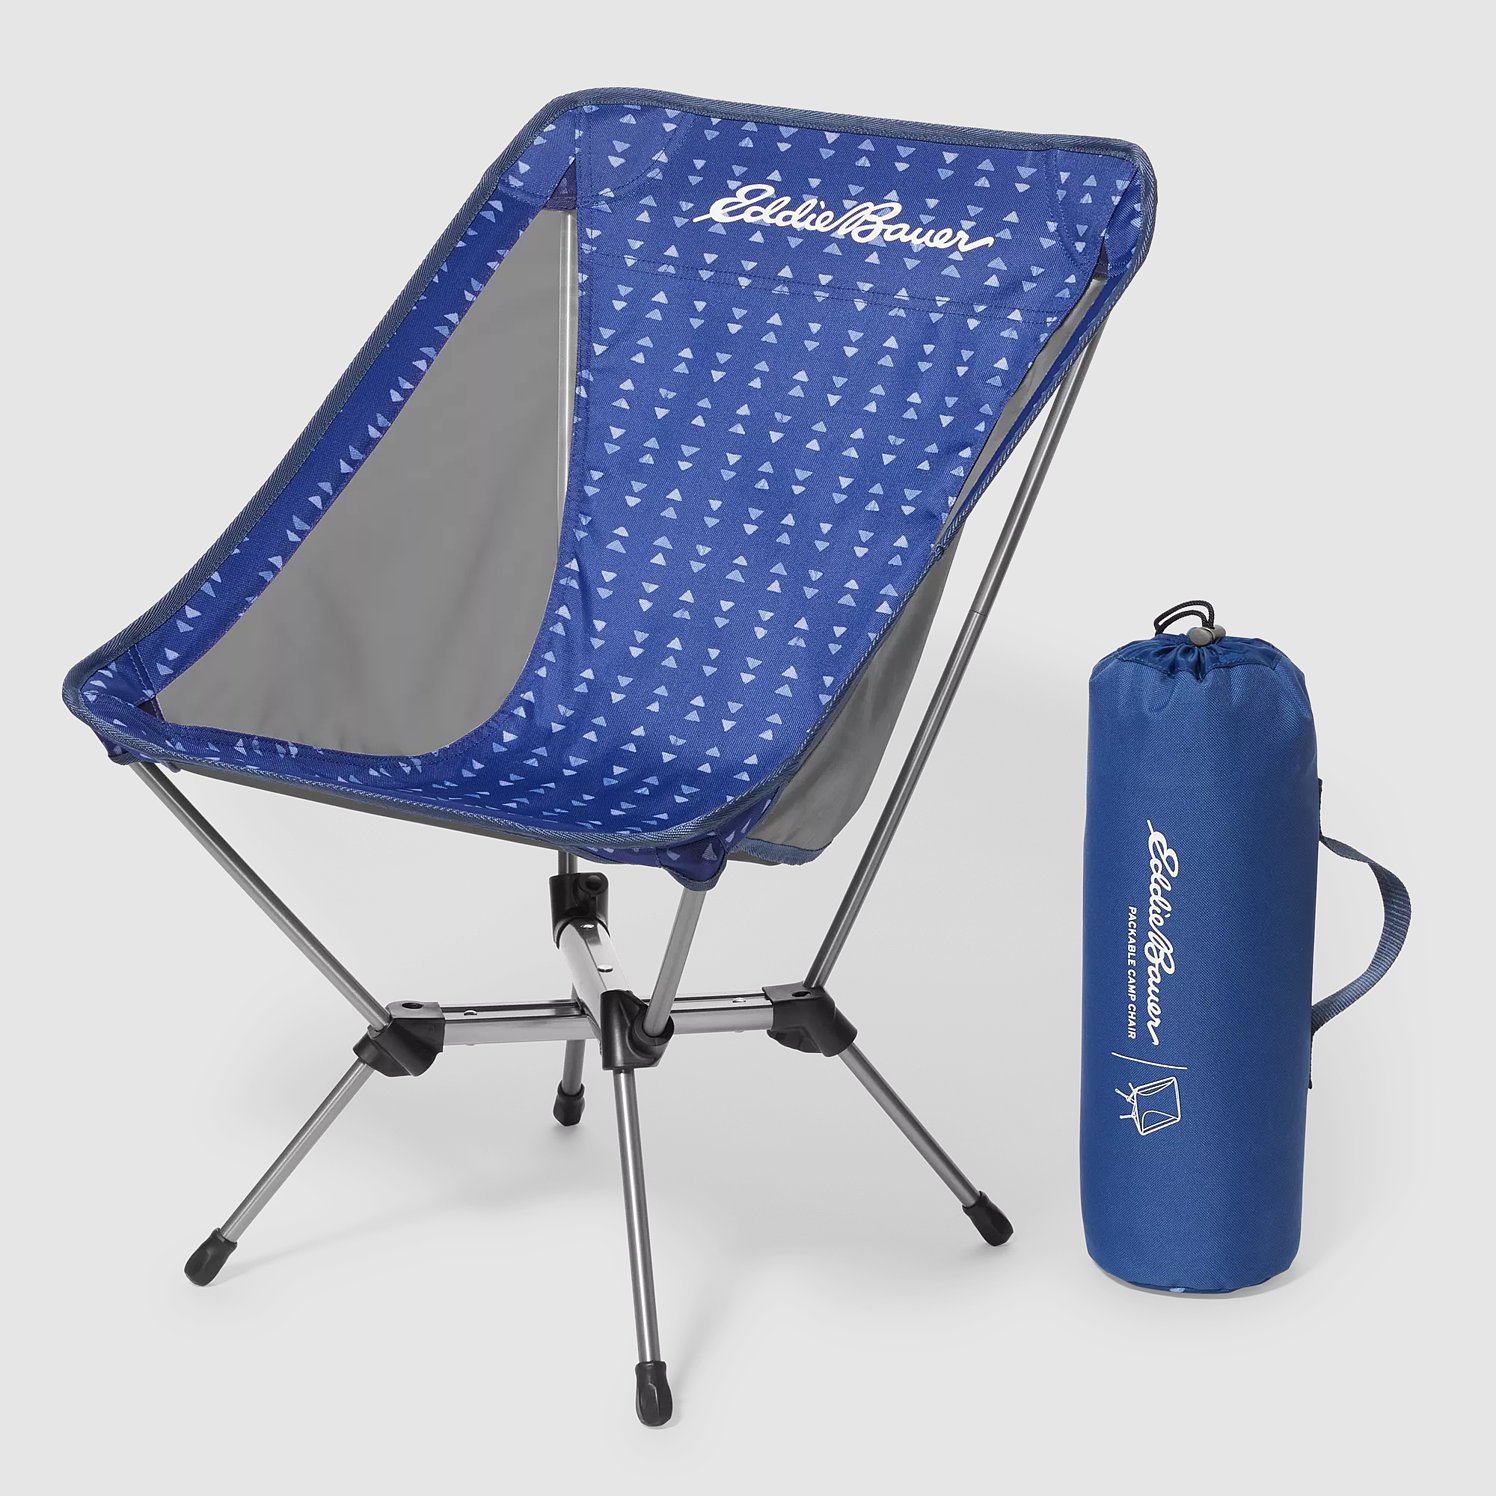 Portable Camp Chair, Small Folding Chair Fishing Chair Armless Camping Chair with Front Pocket & Carrying Bag Support 265lbs, for Outdoor Camping